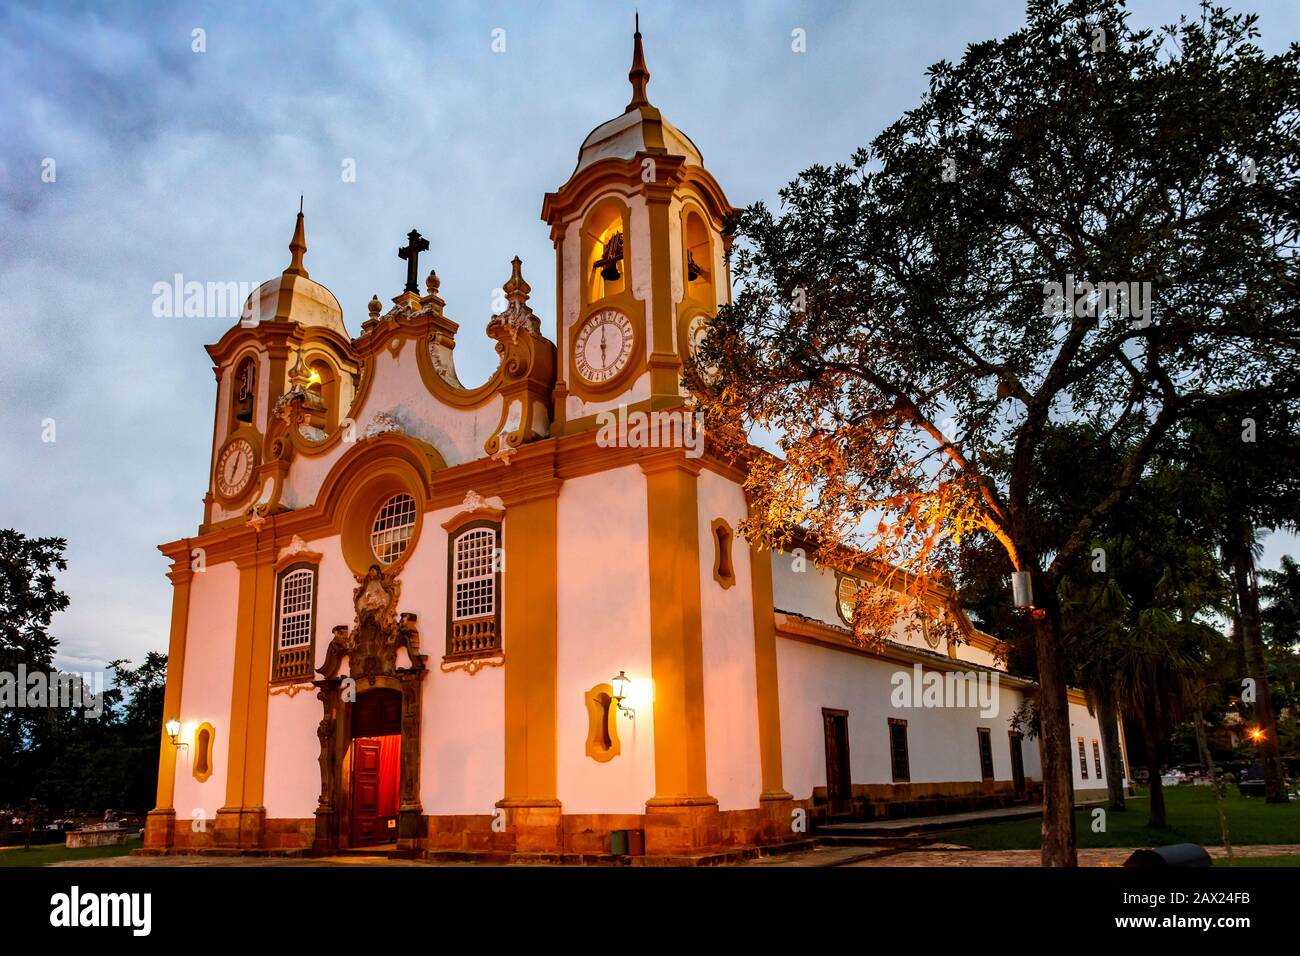 Facade of an old church built in the 18th century in baroque style in the famous city of Tiradentes, Minas Gerais at dusk Stock Photo